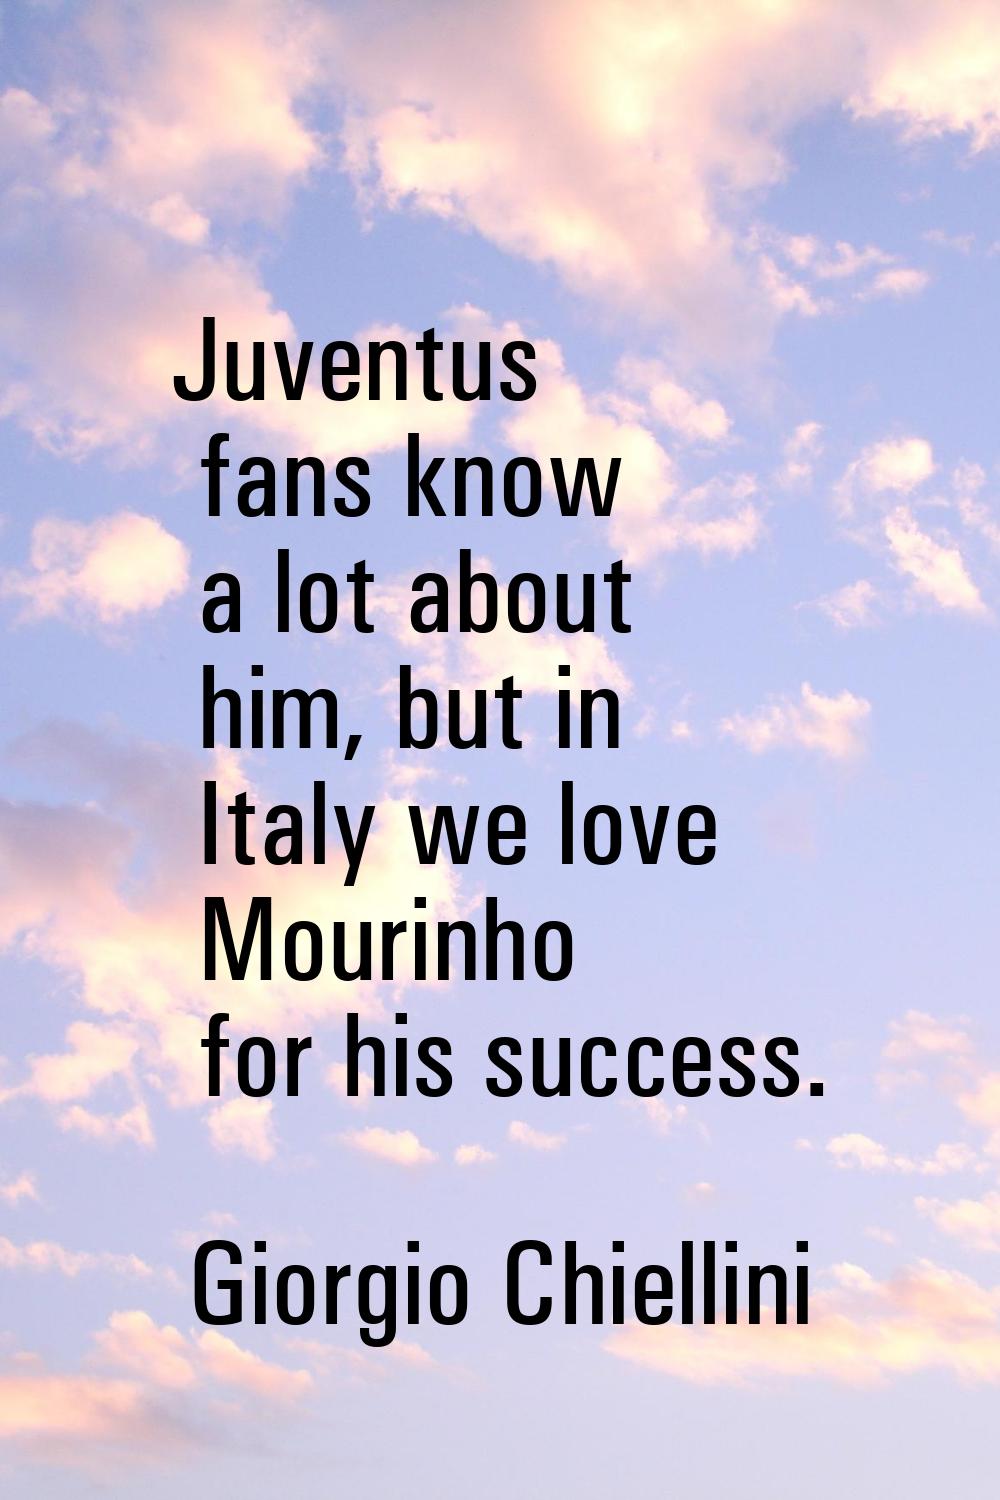 Juventus fans know a lot about him, but in Italy we love Mourinho for his success.